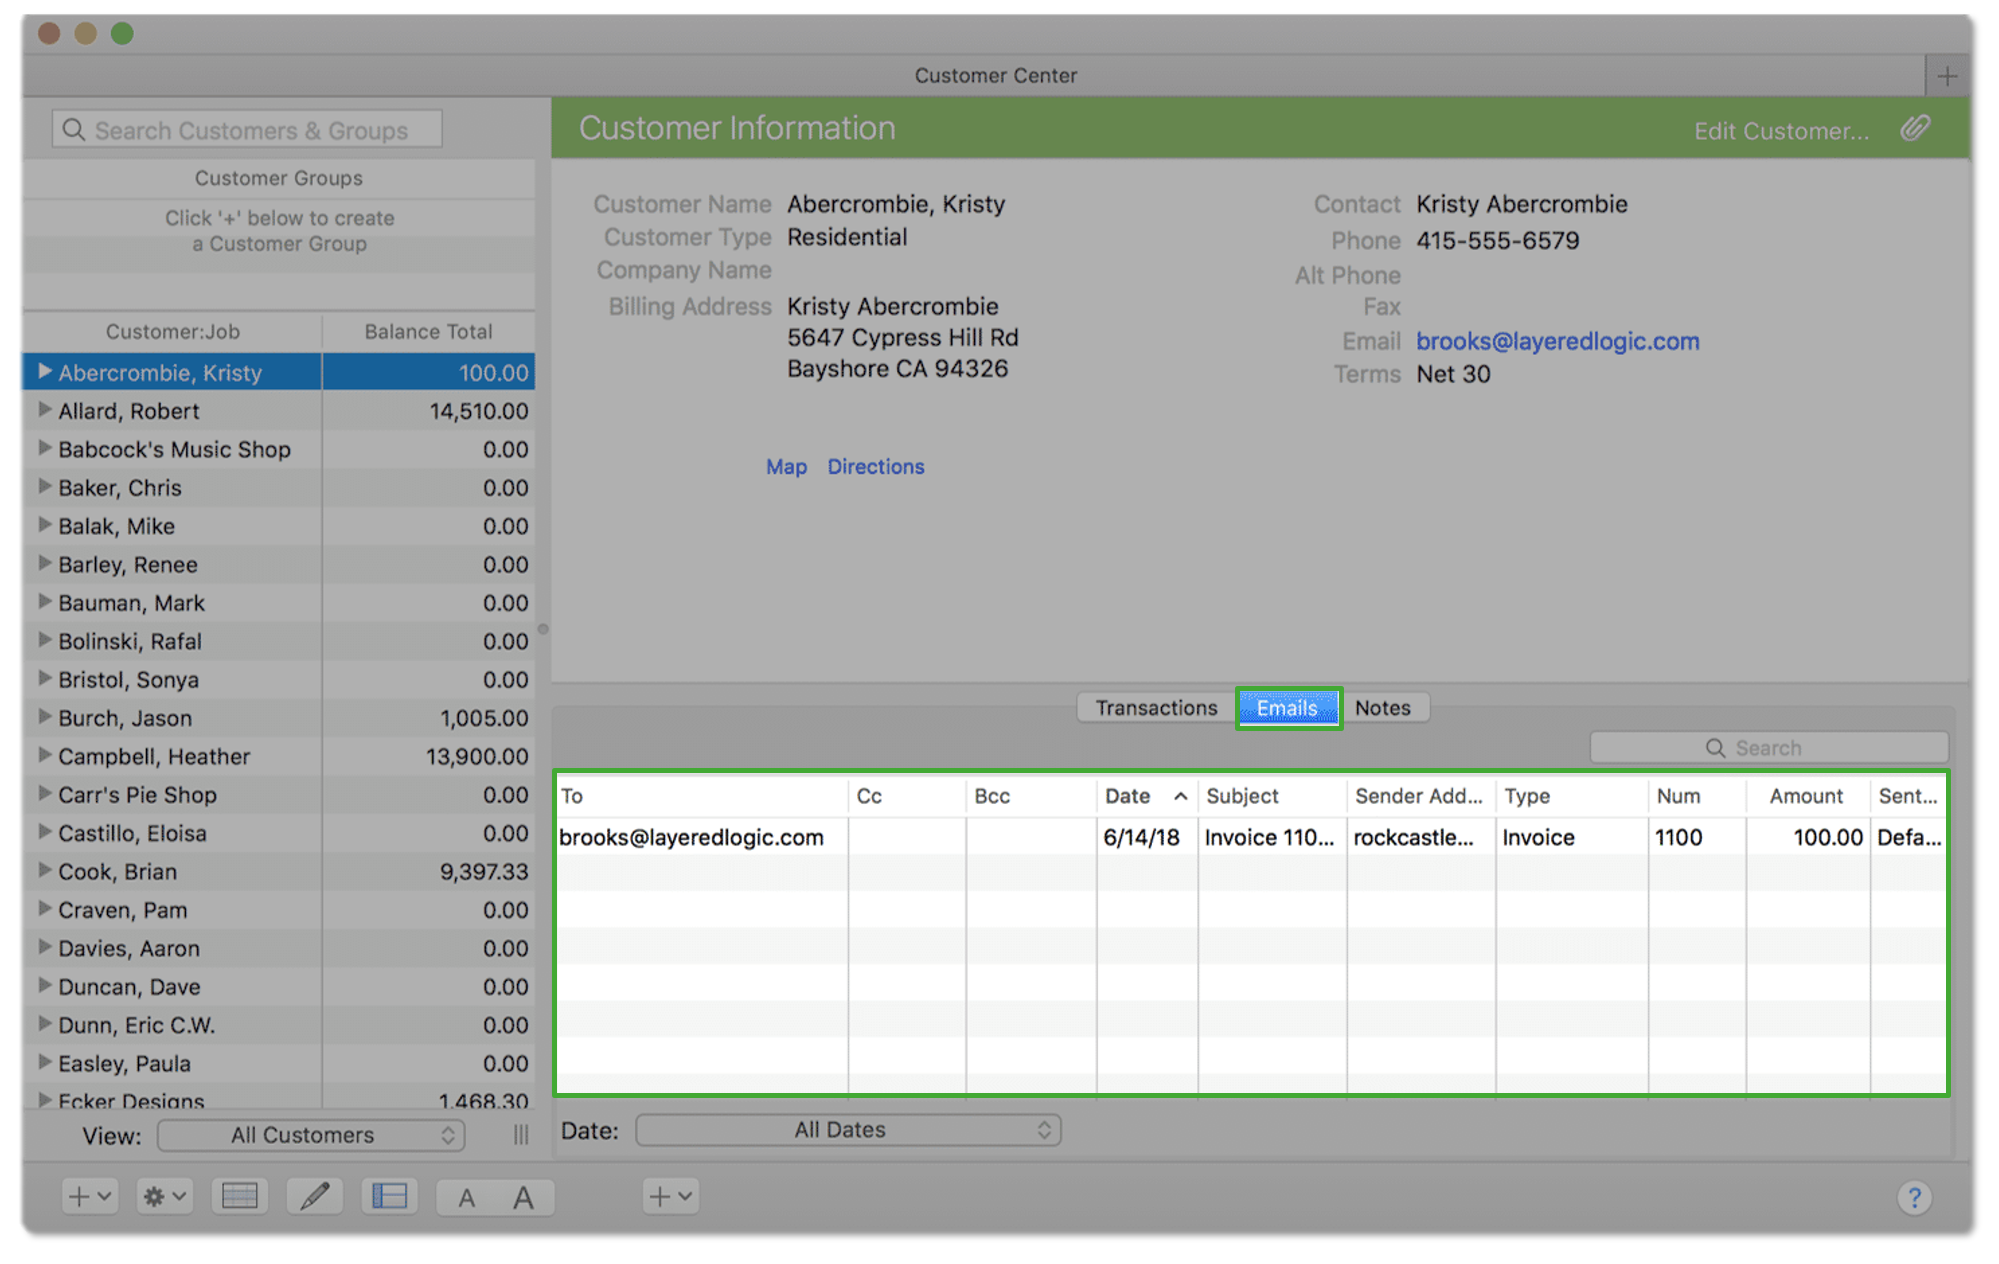 quickbooks mac 2019 compatible with mojave